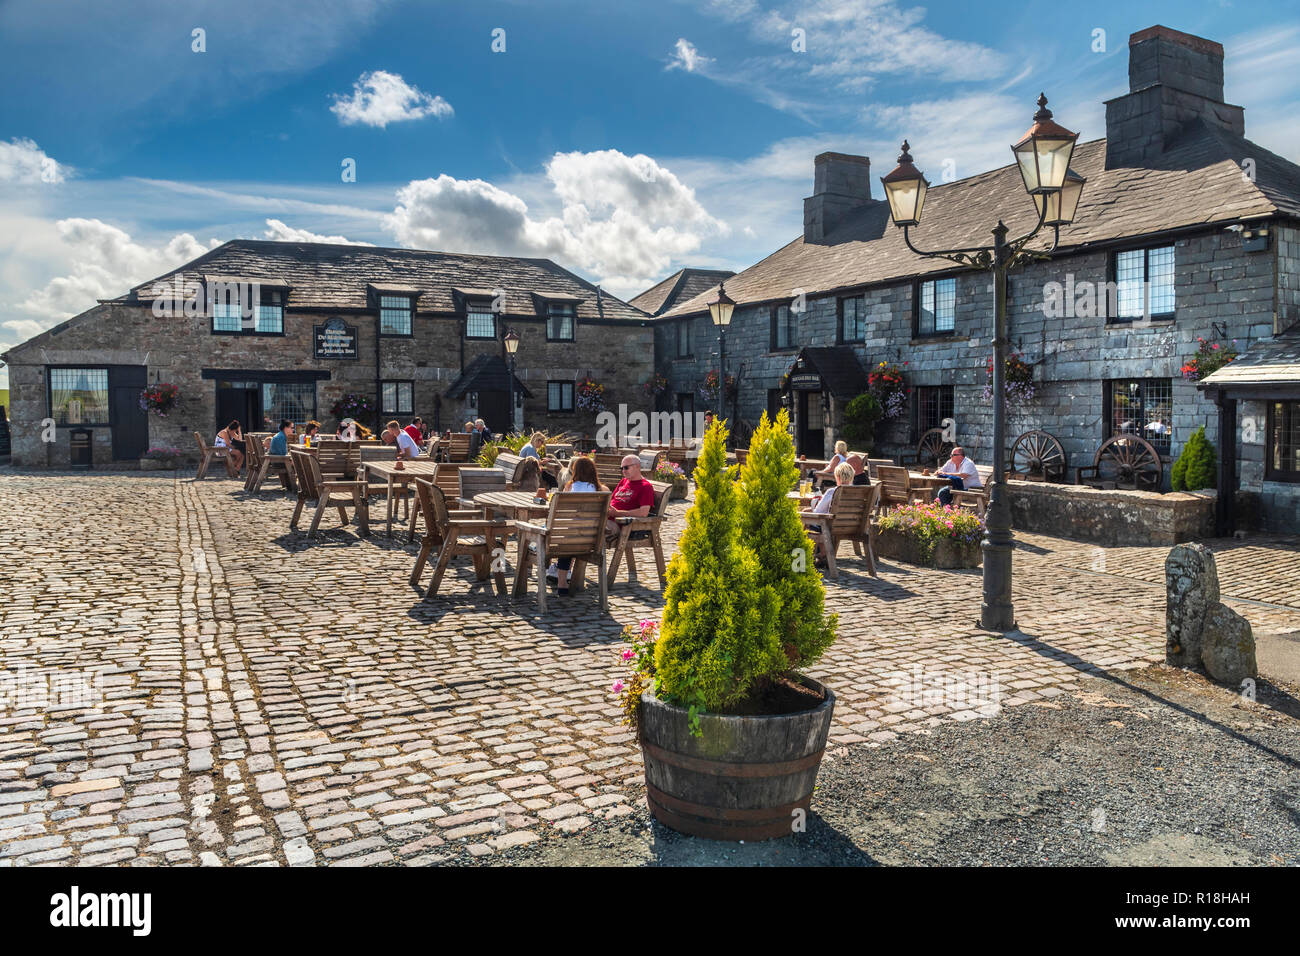 On a sunny day in August, people sit outside Jamaica Inn situated on Bodmin Moor, made famous by Daphne du Maurier in her novel of the same name. Stock Photo